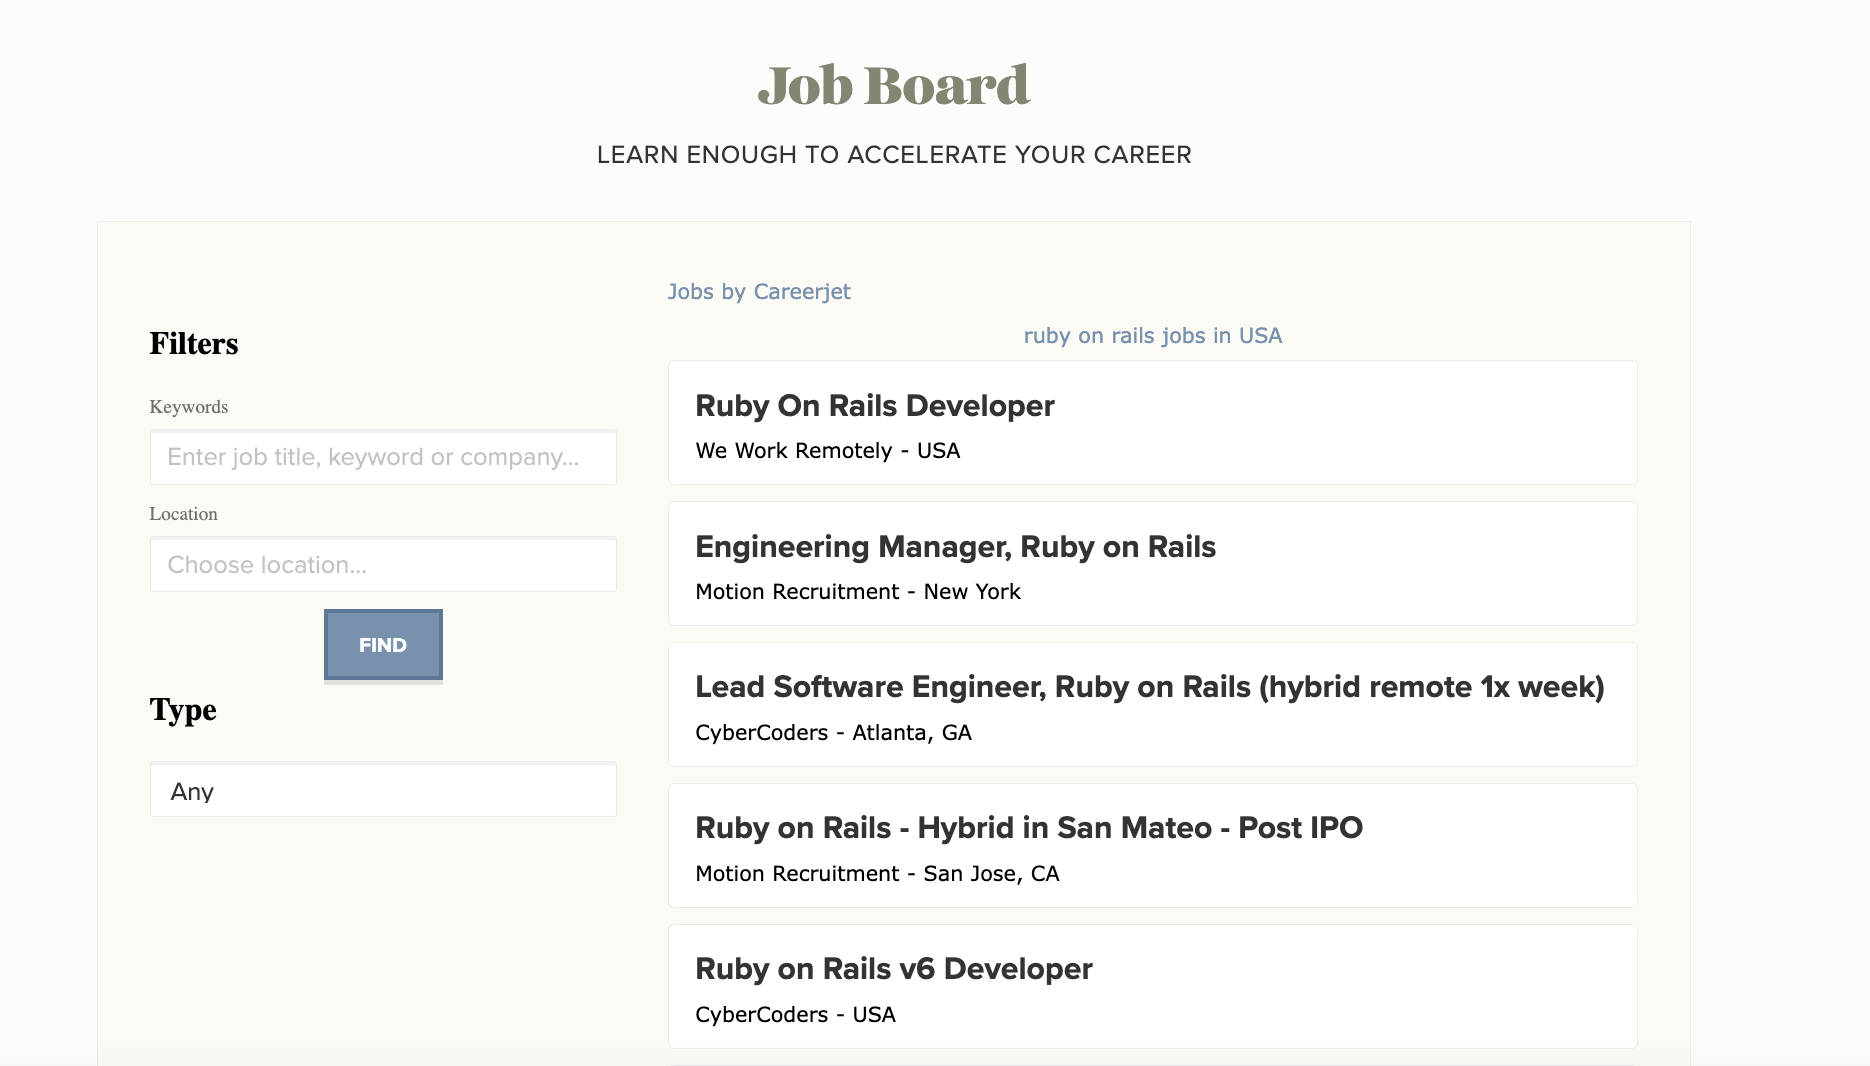 We Launched a Job Board!